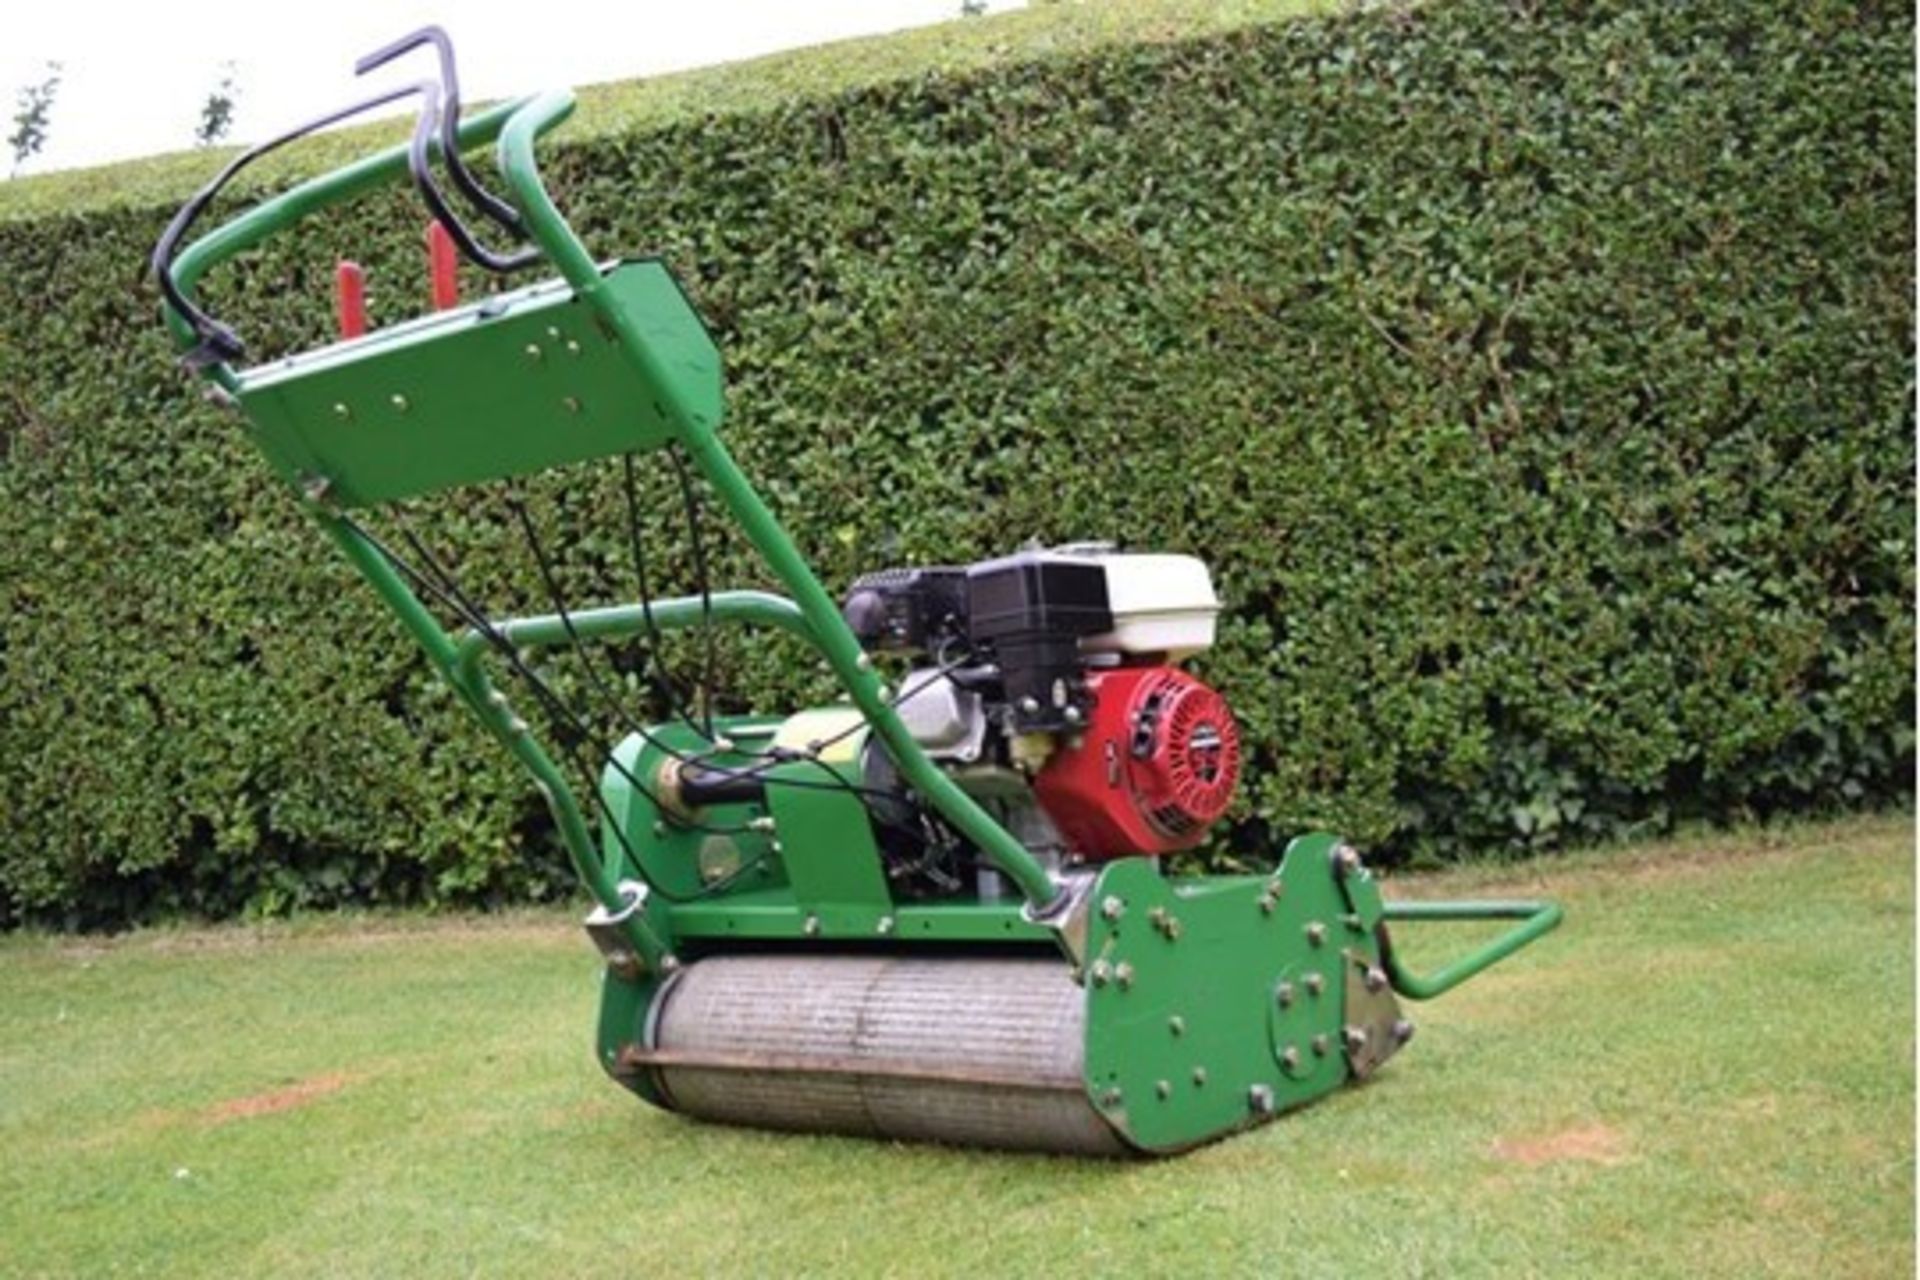 2004 Dennis G560 5 Blade Cylinder Mower With Grass Box - Image 2 of 12